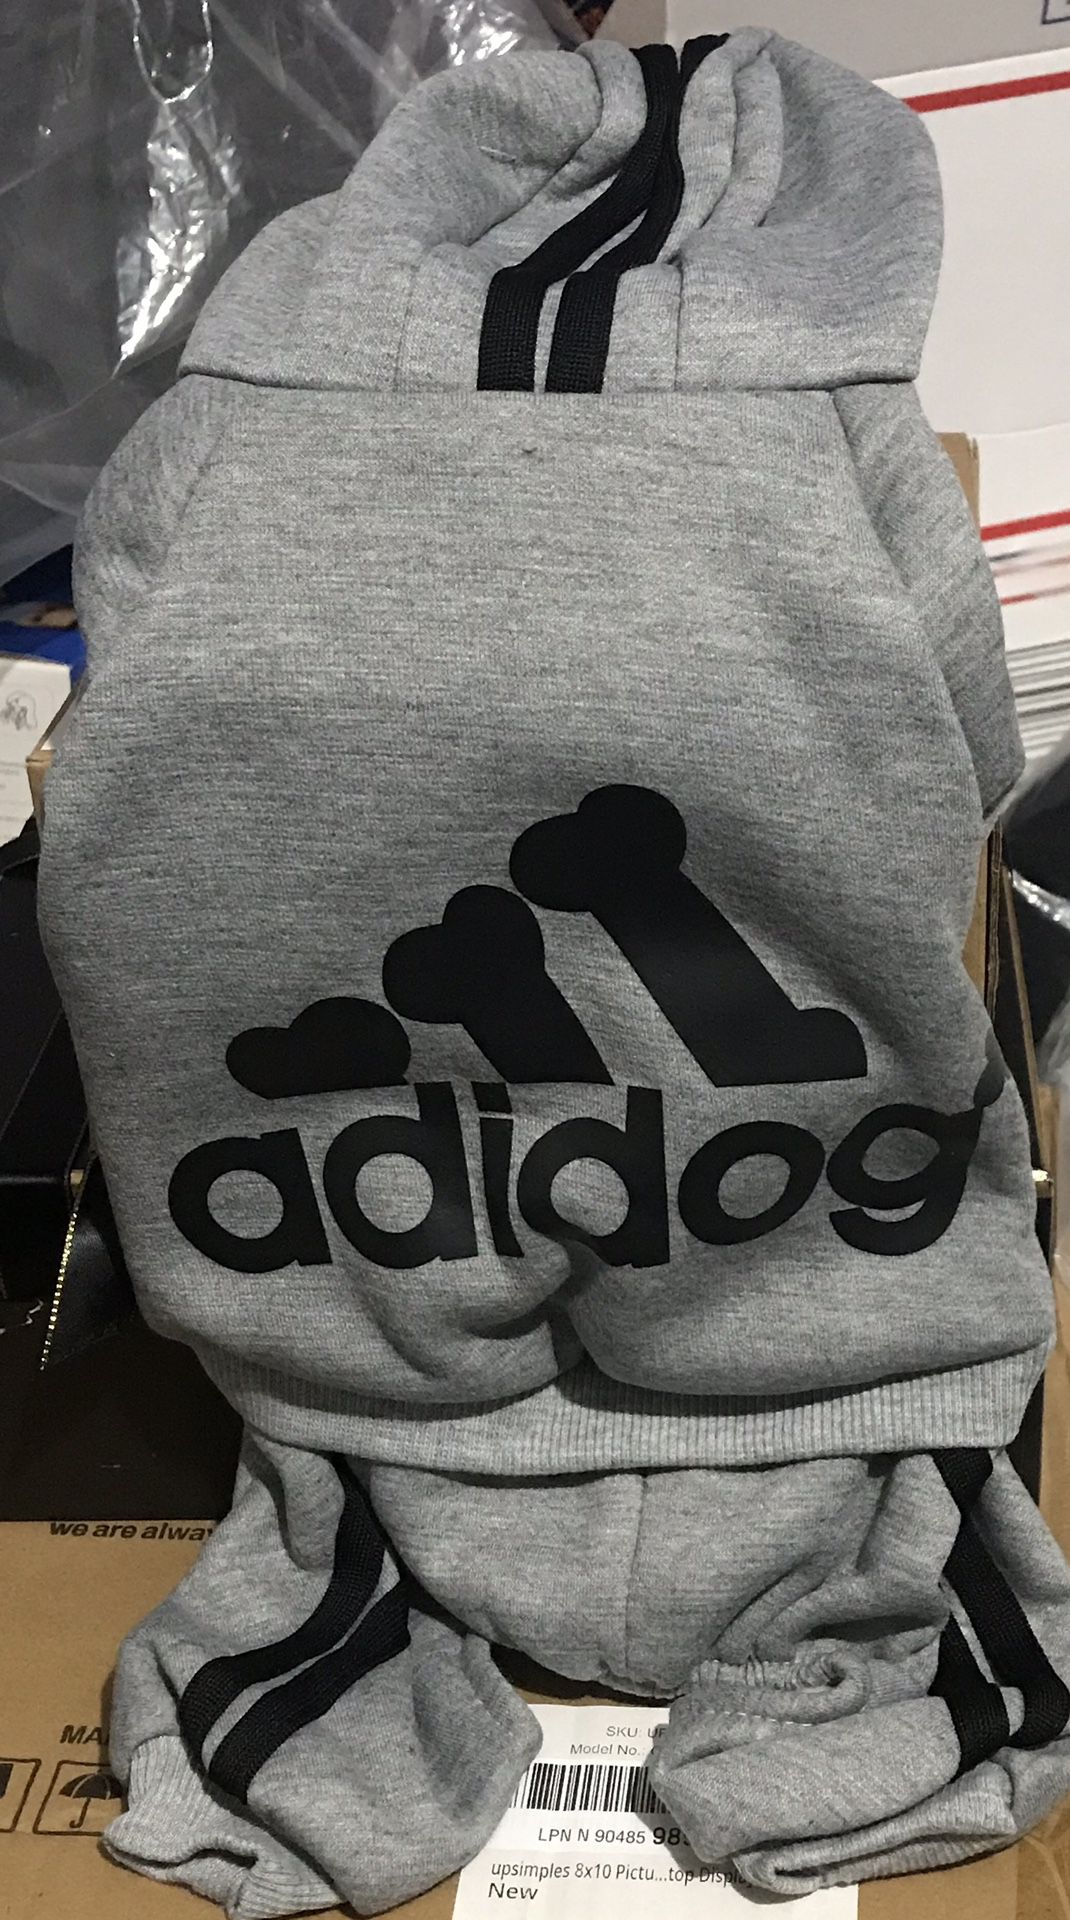 NEW adidog  Small Dog Full Jogger Outfit With Hoodie - Button Up 